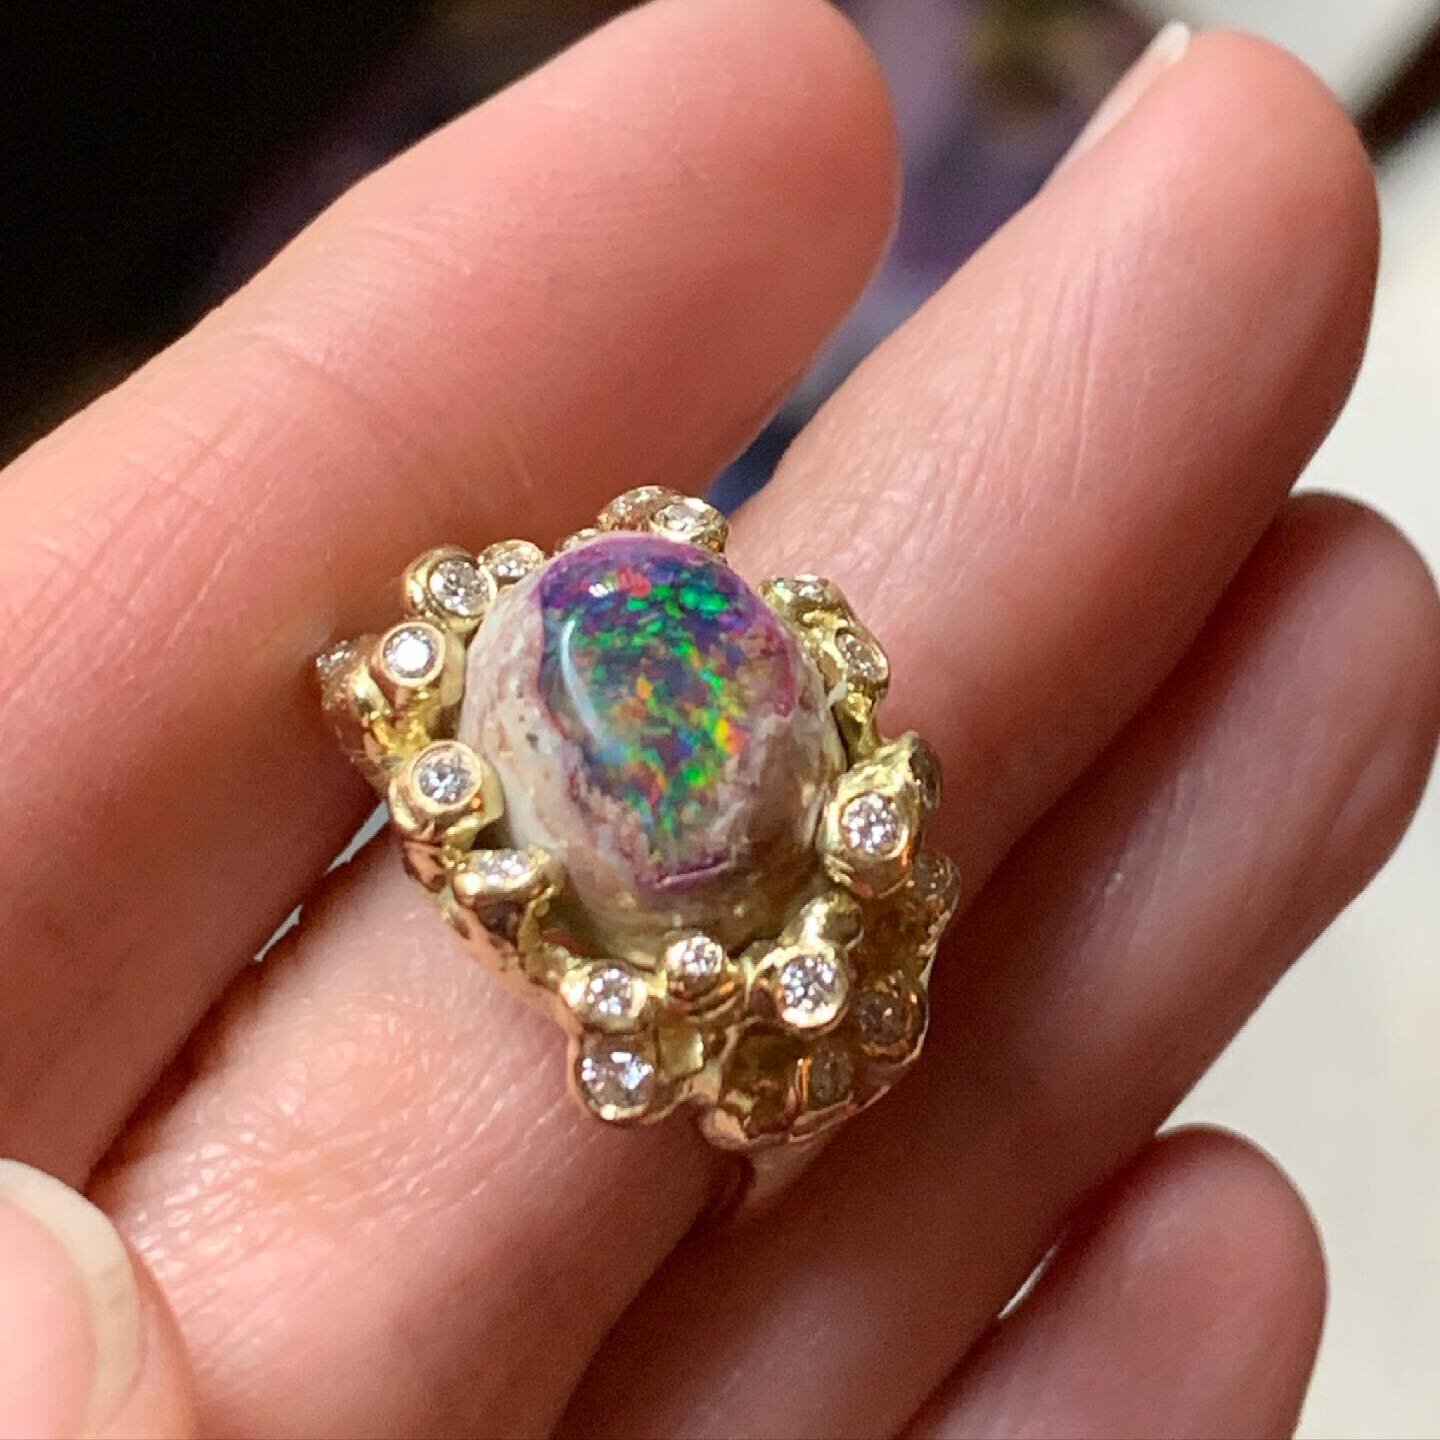 An extraordinary Mexican matrix opal that holds a small universe, like a colorful vortex swirling, in the center of a sparkling diamond sky.